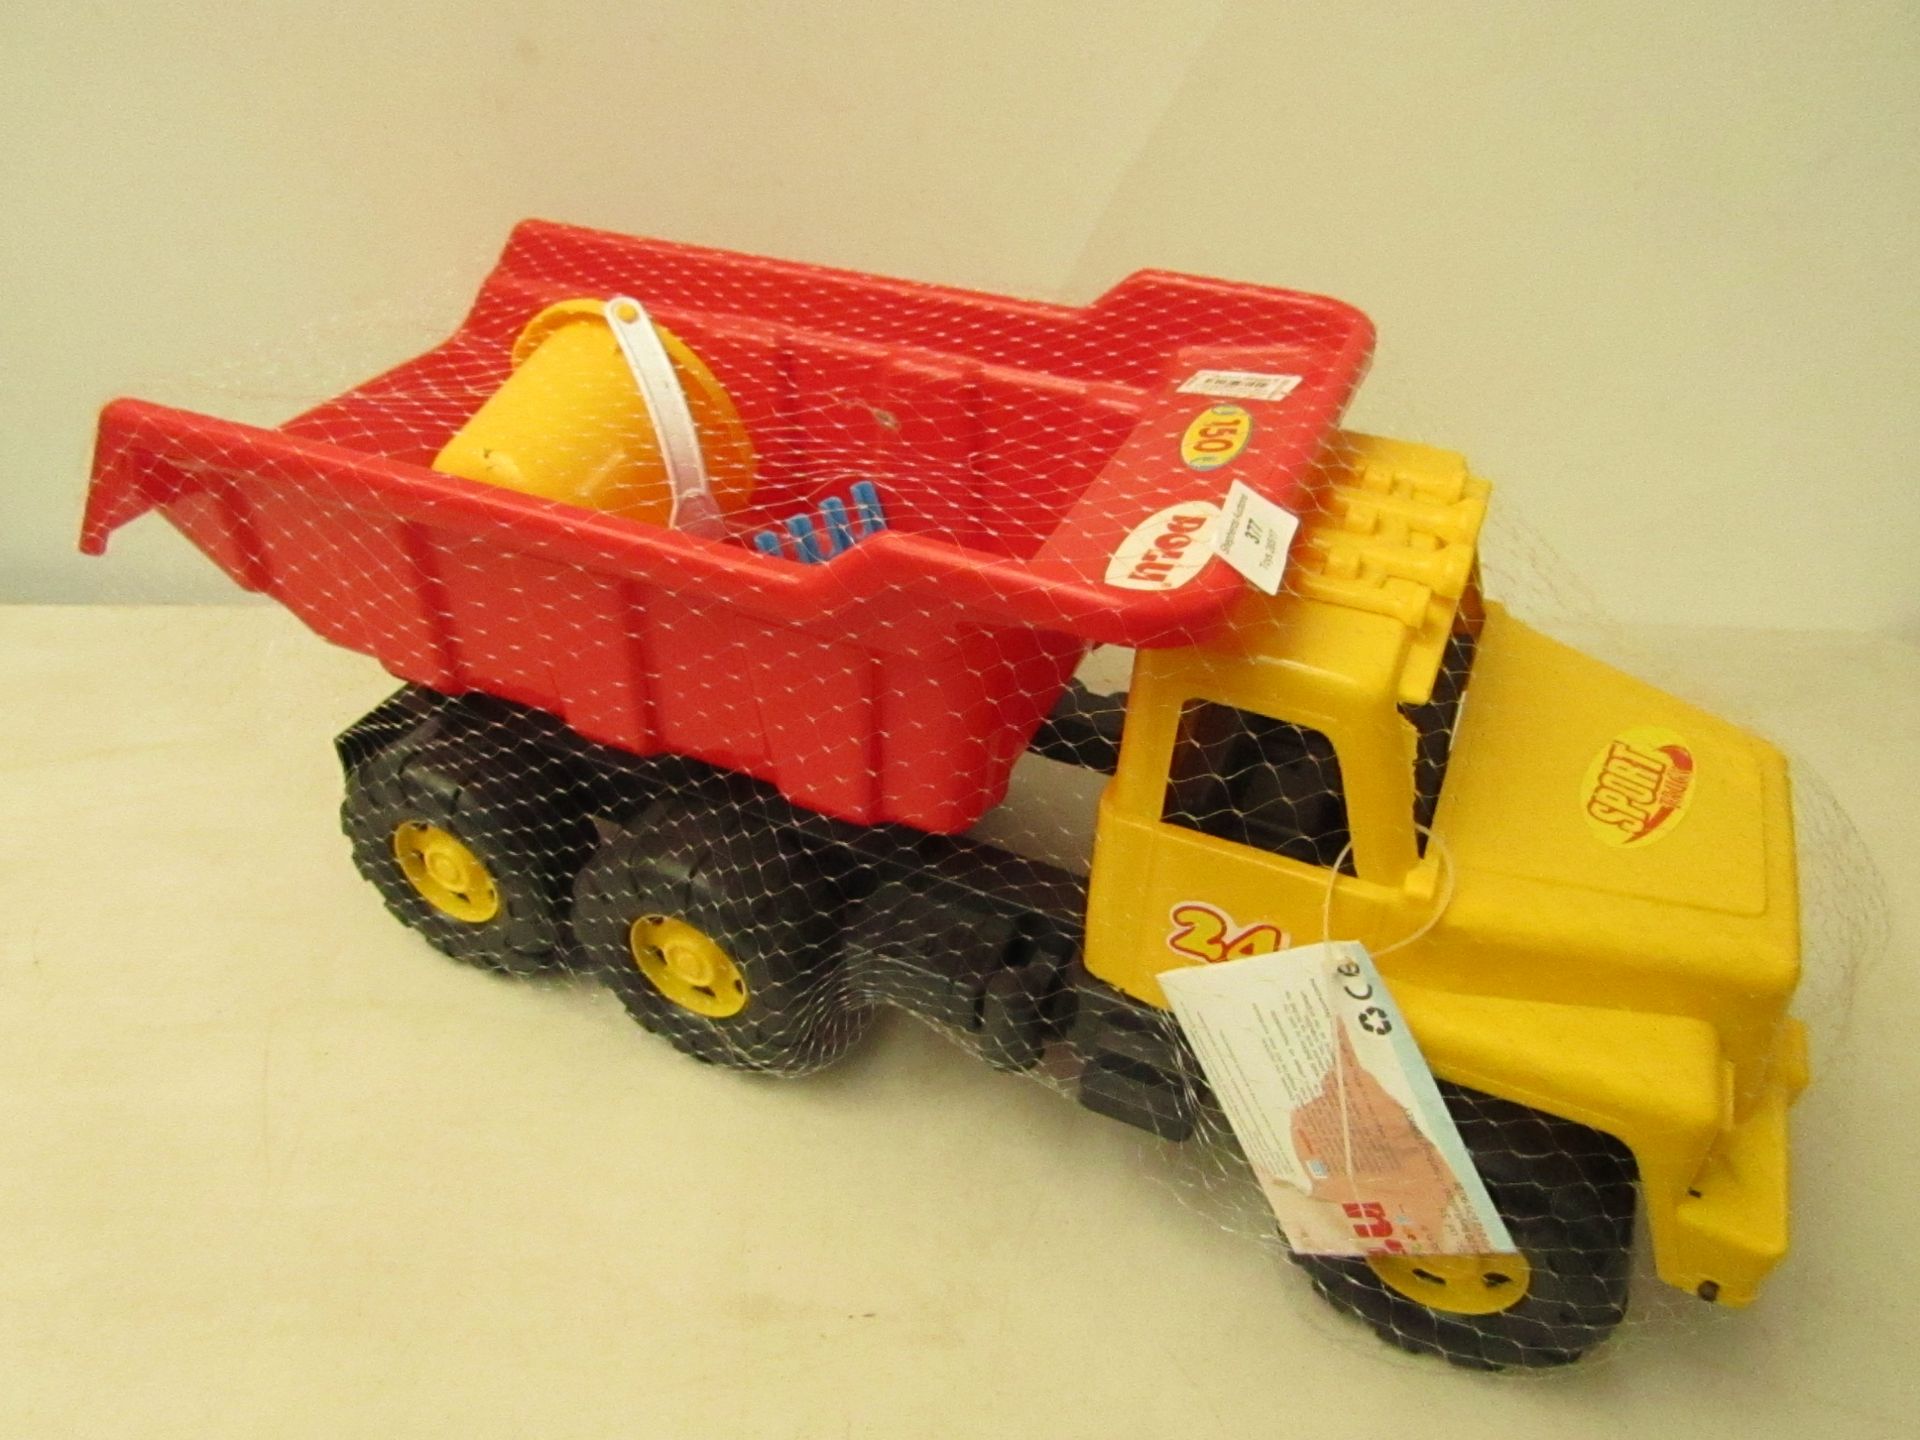 Sport truck with bucket and spade, new in packaging.